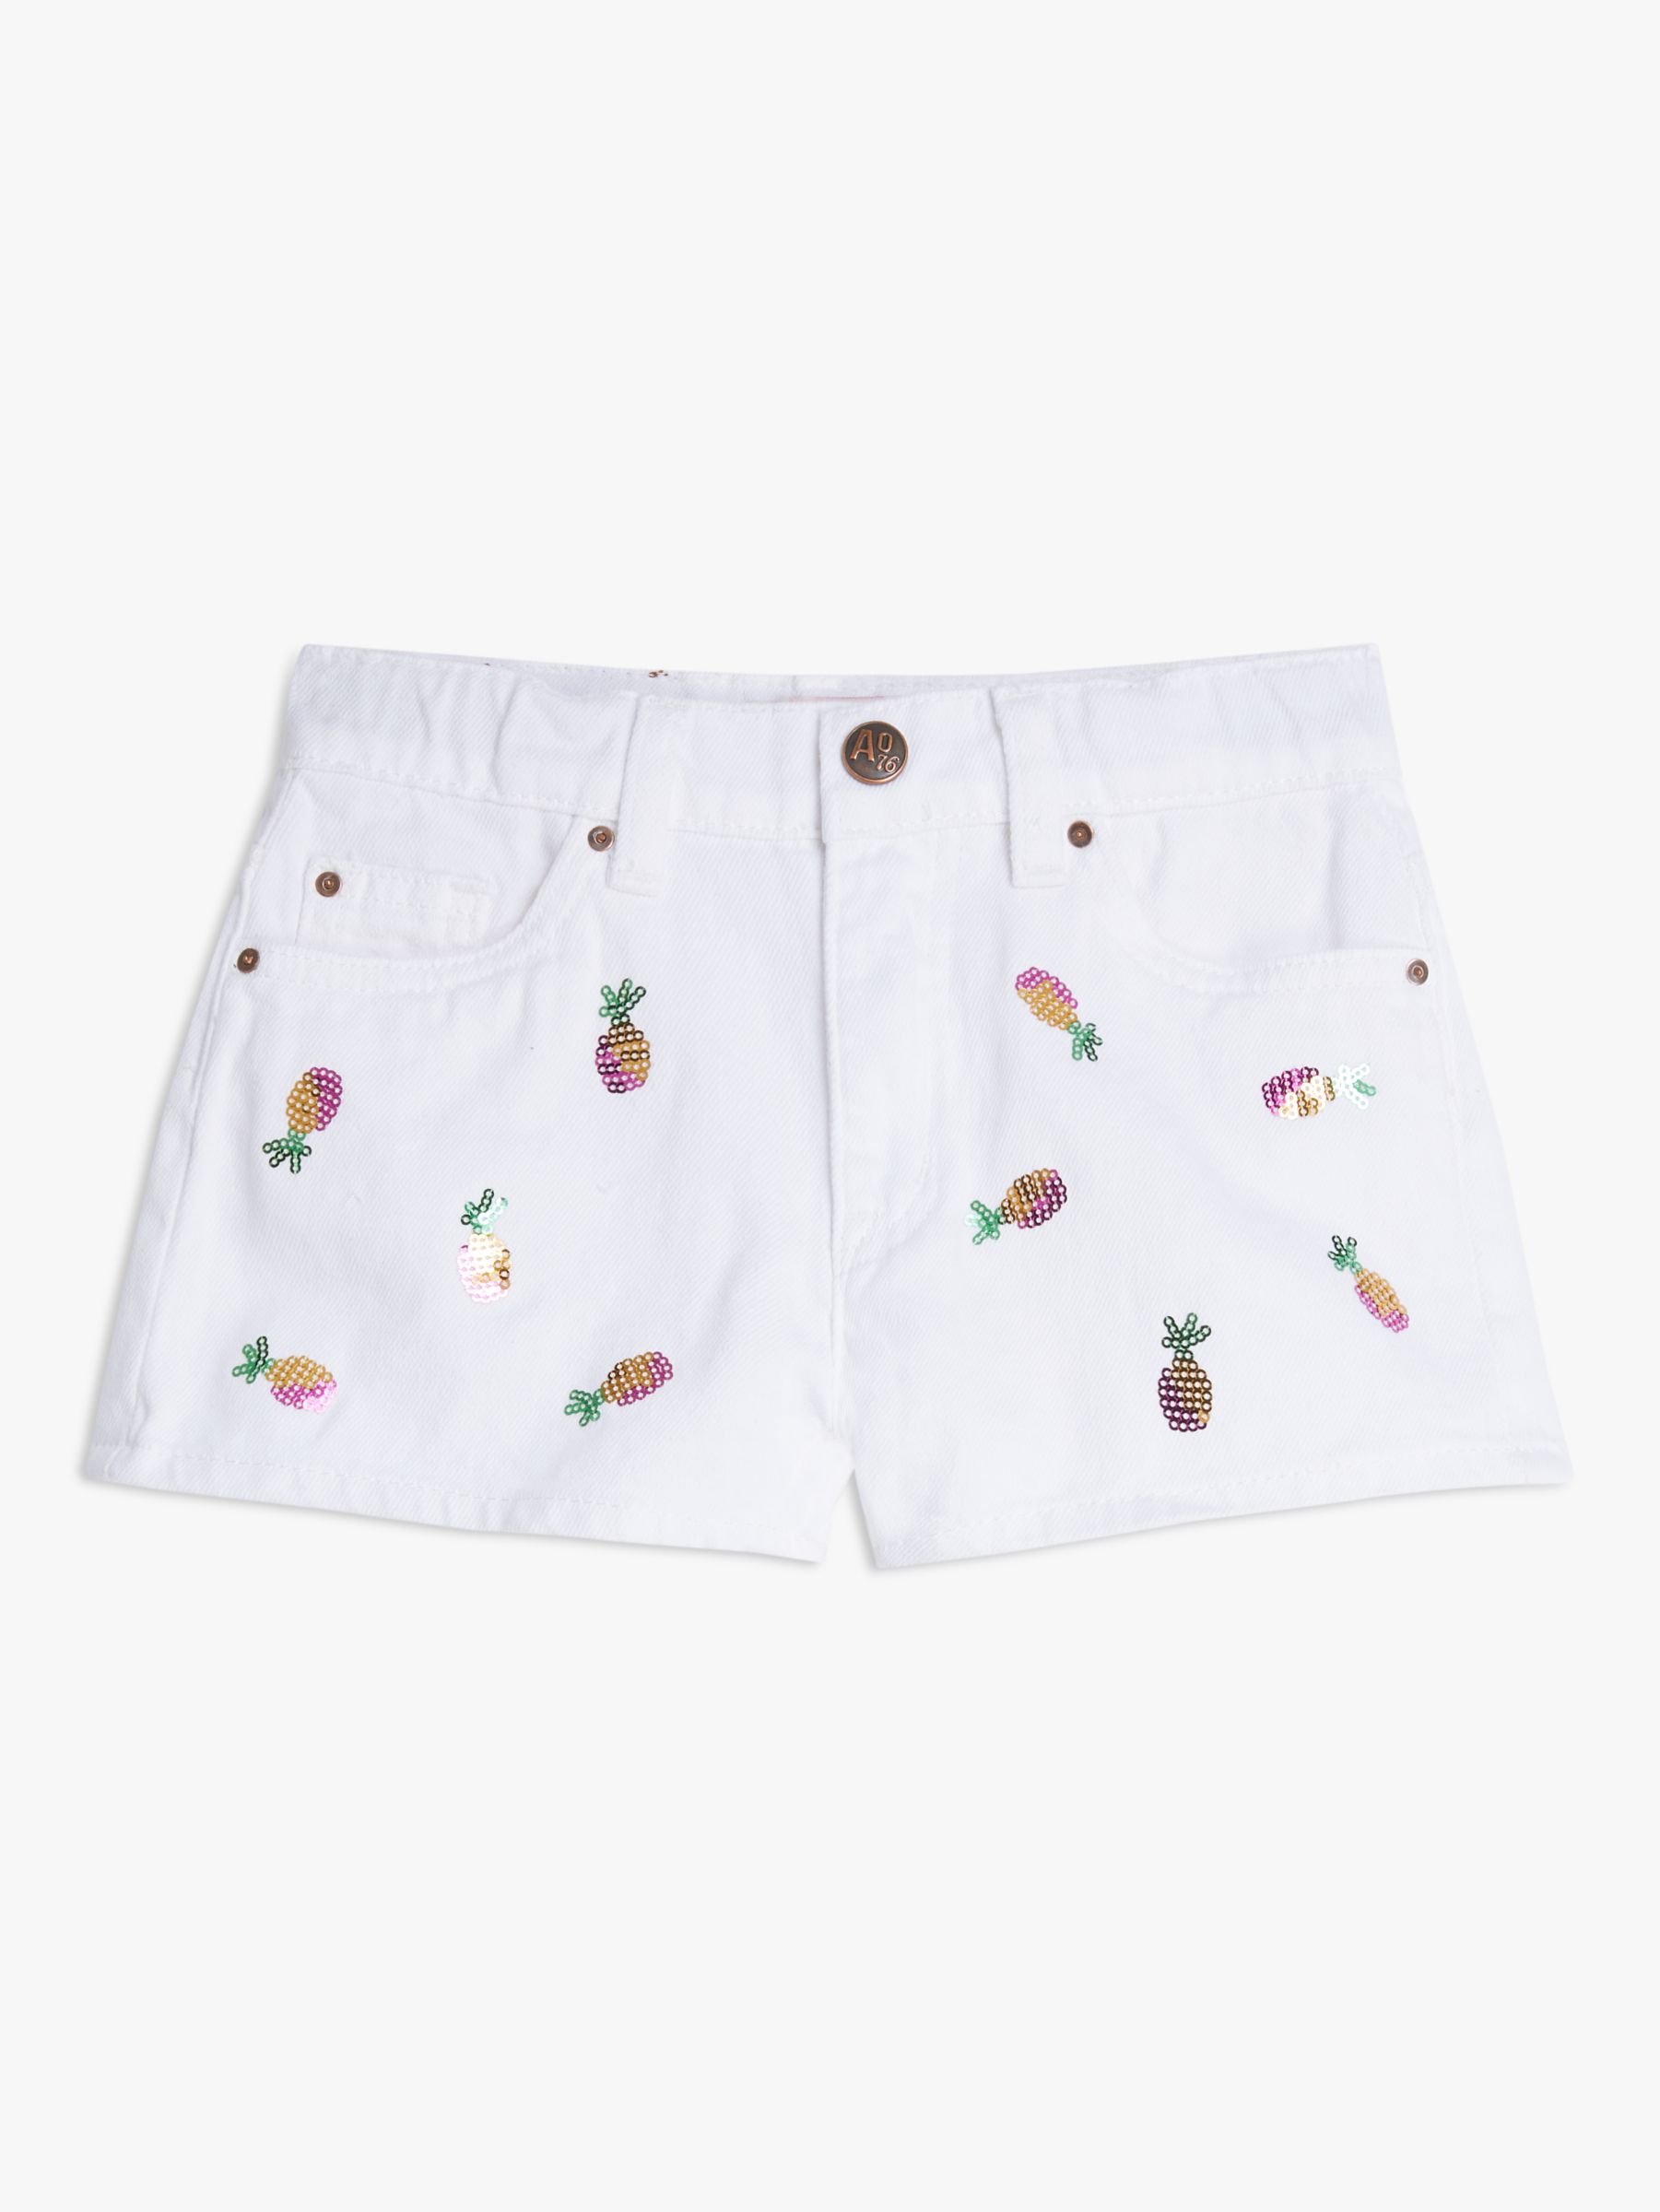 John Lewis John Lewis girls Age 3 White Shorts With Zip And Button Tie 